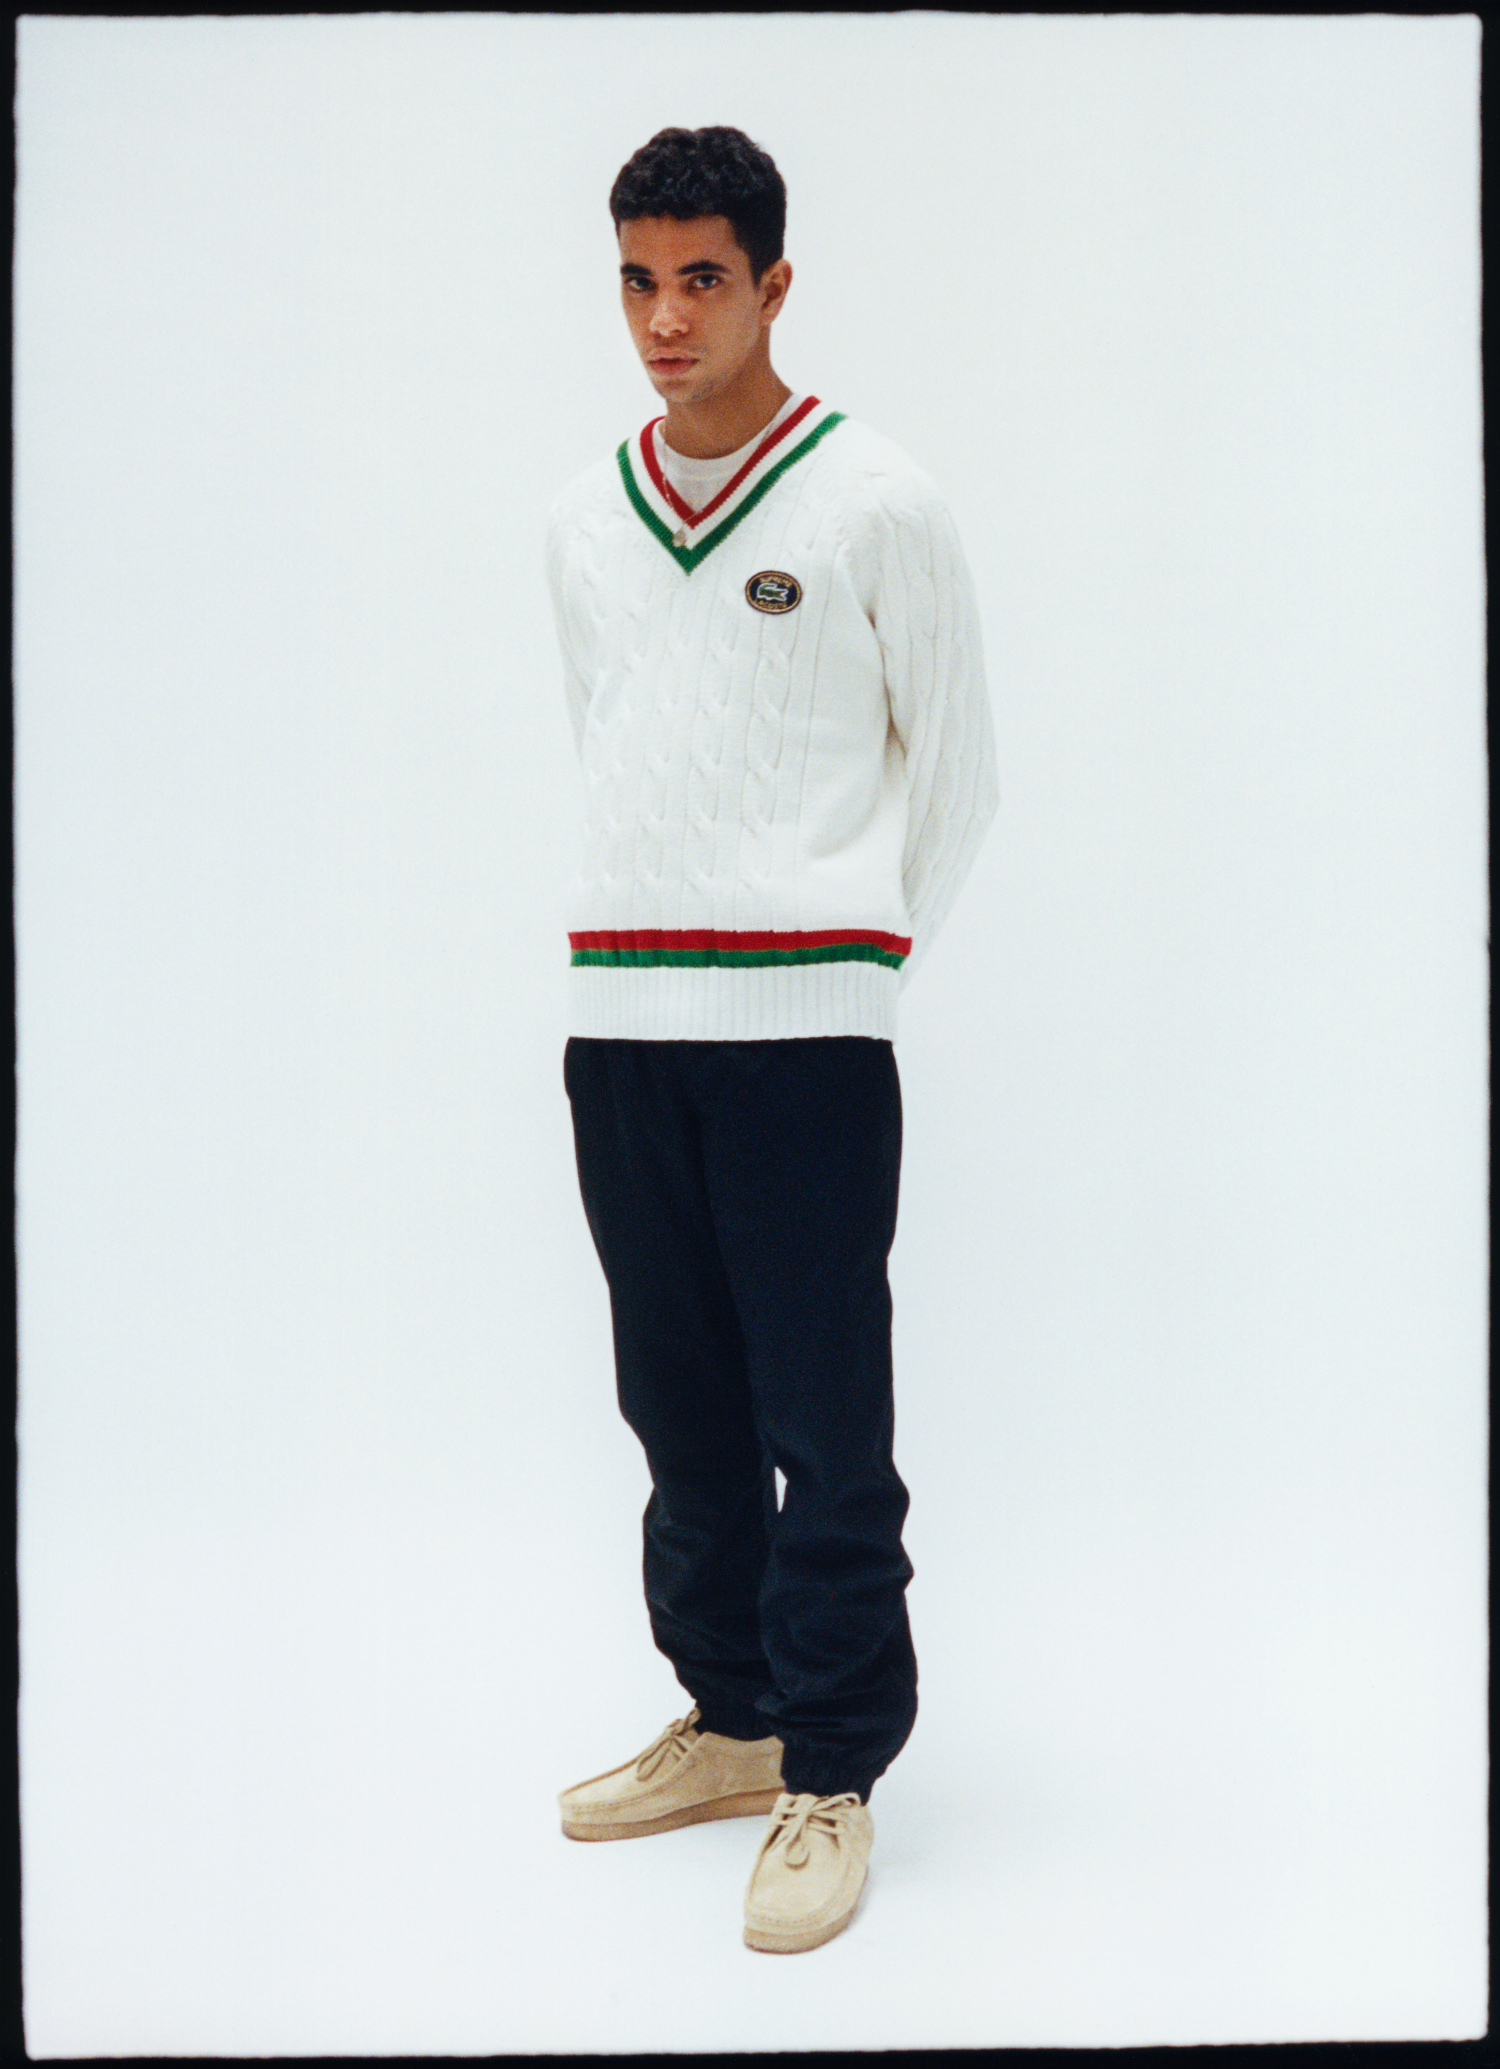 EVERYTHING YOU NEED TO KNOW ABOUT THE NEW SUPREME X LACOSTE COLLAB